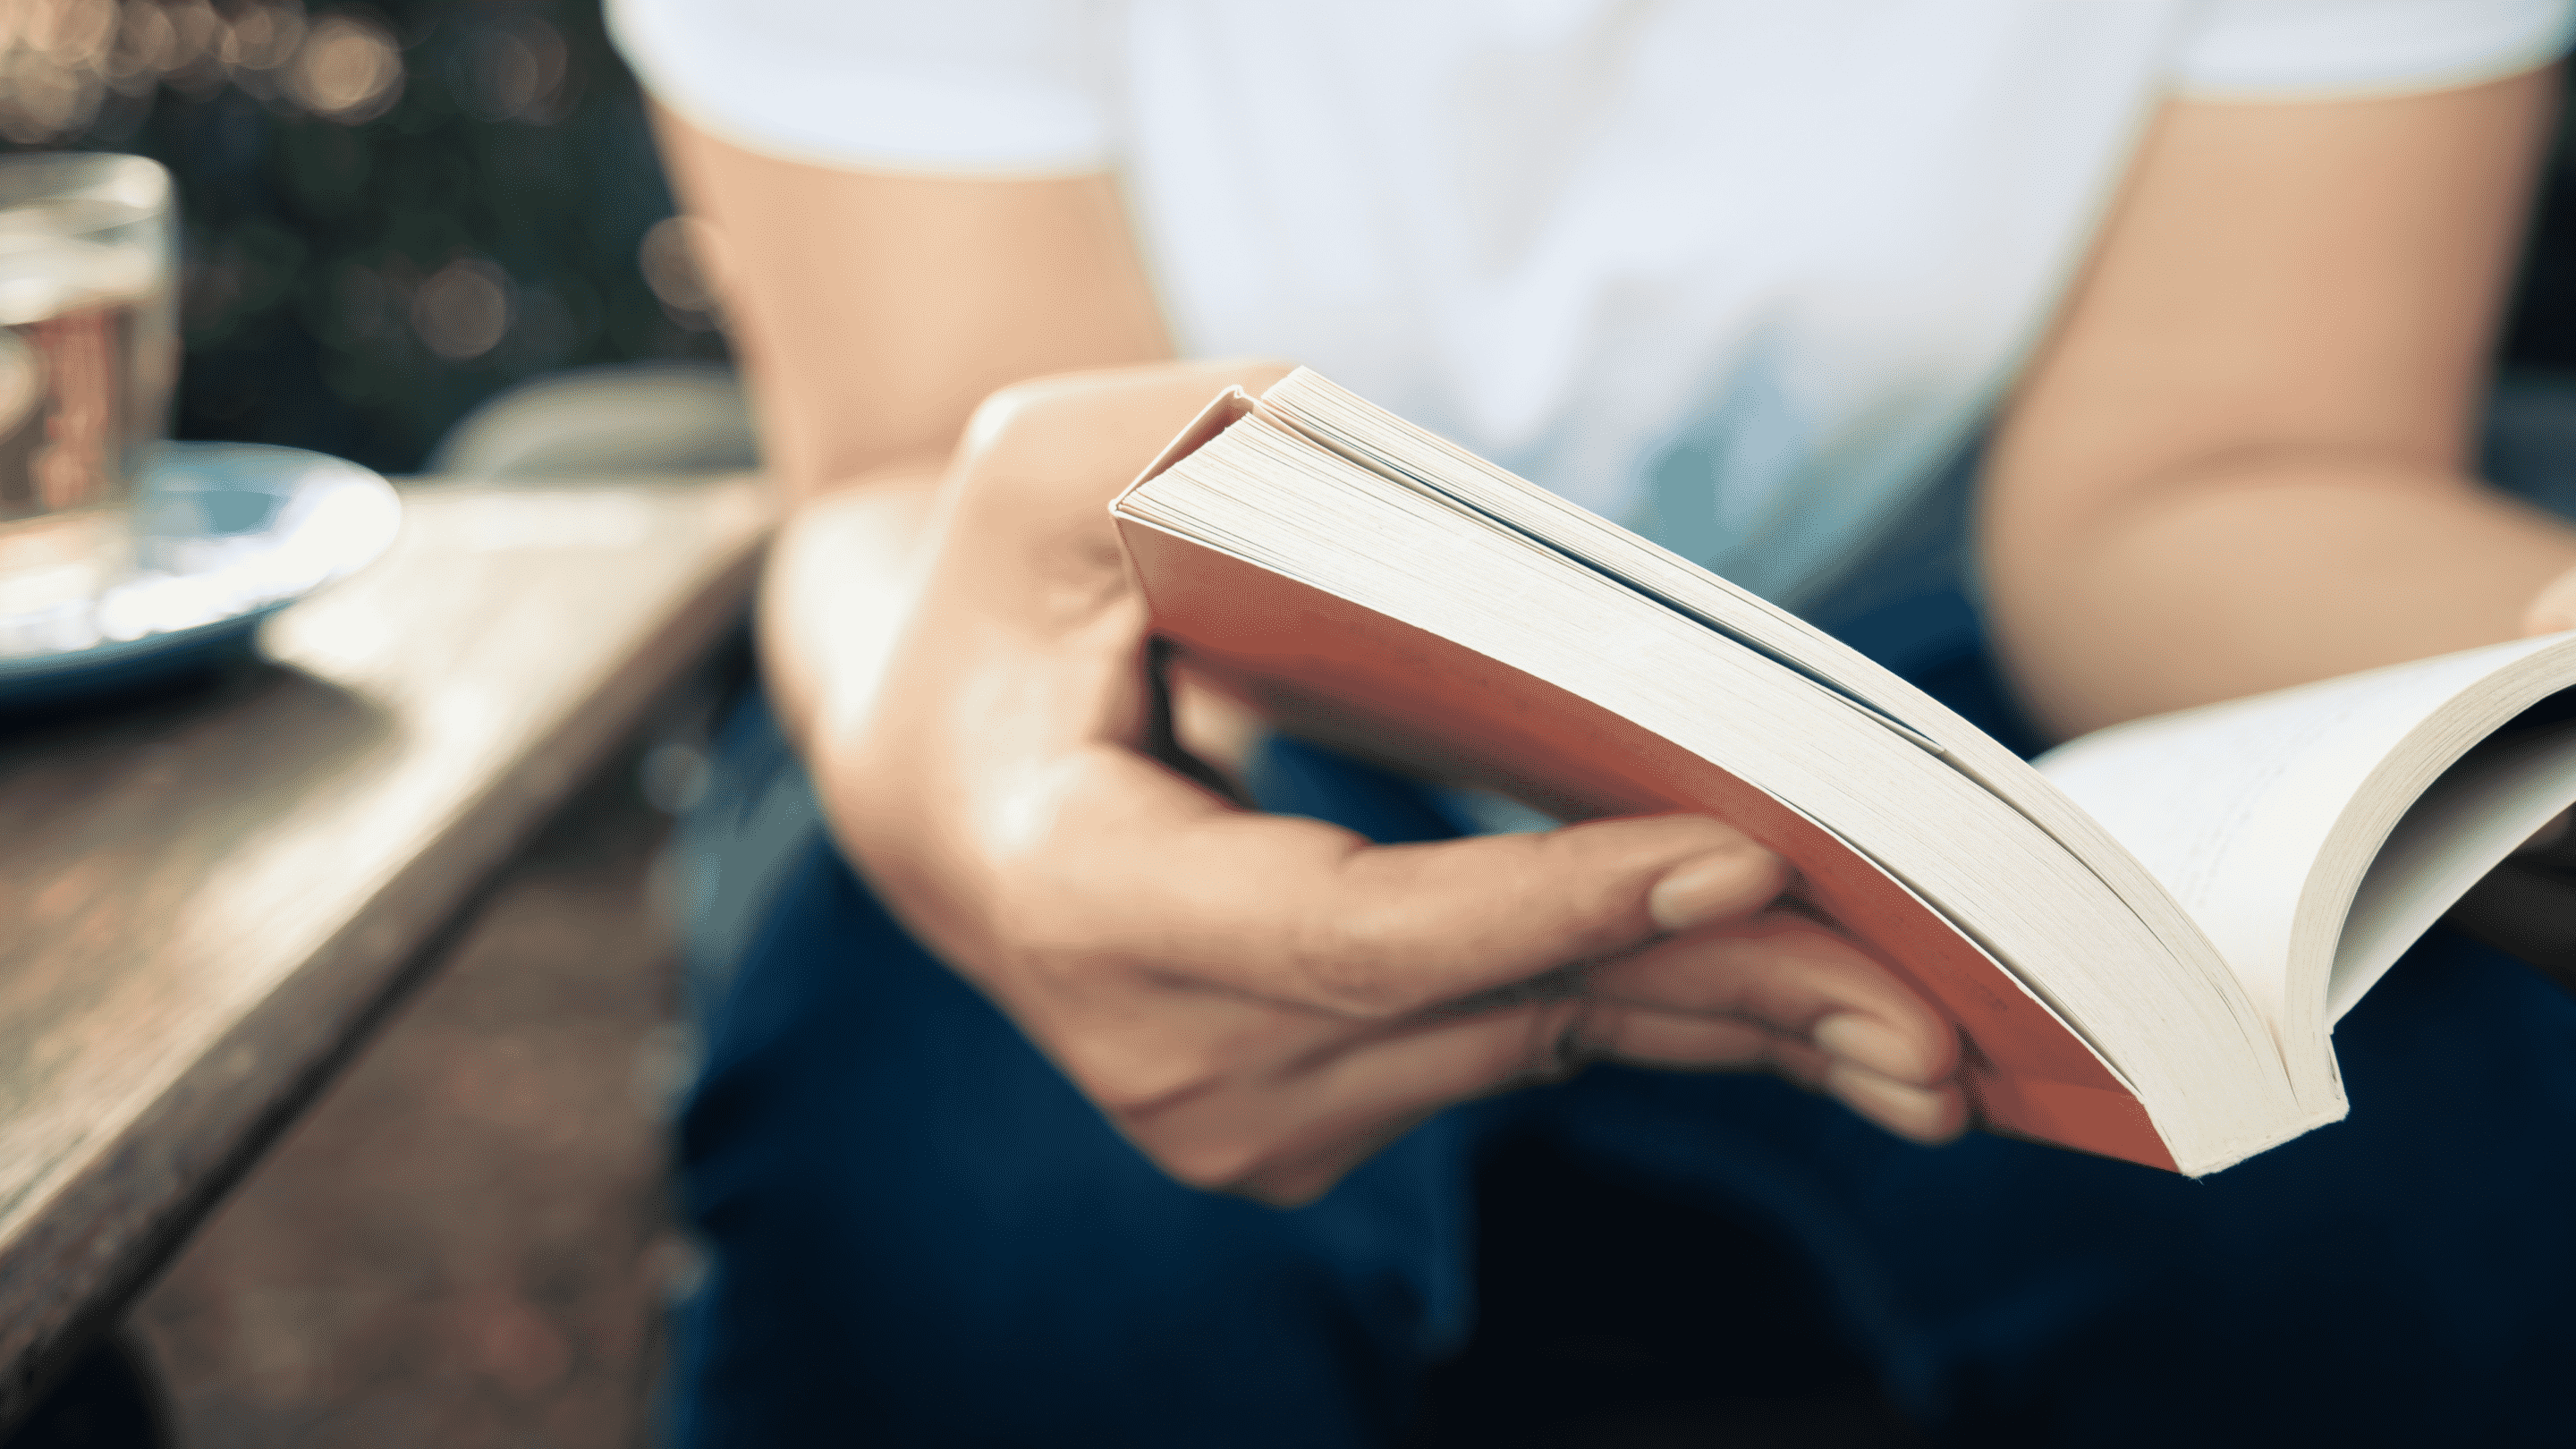 What are the mental health benefits of reading